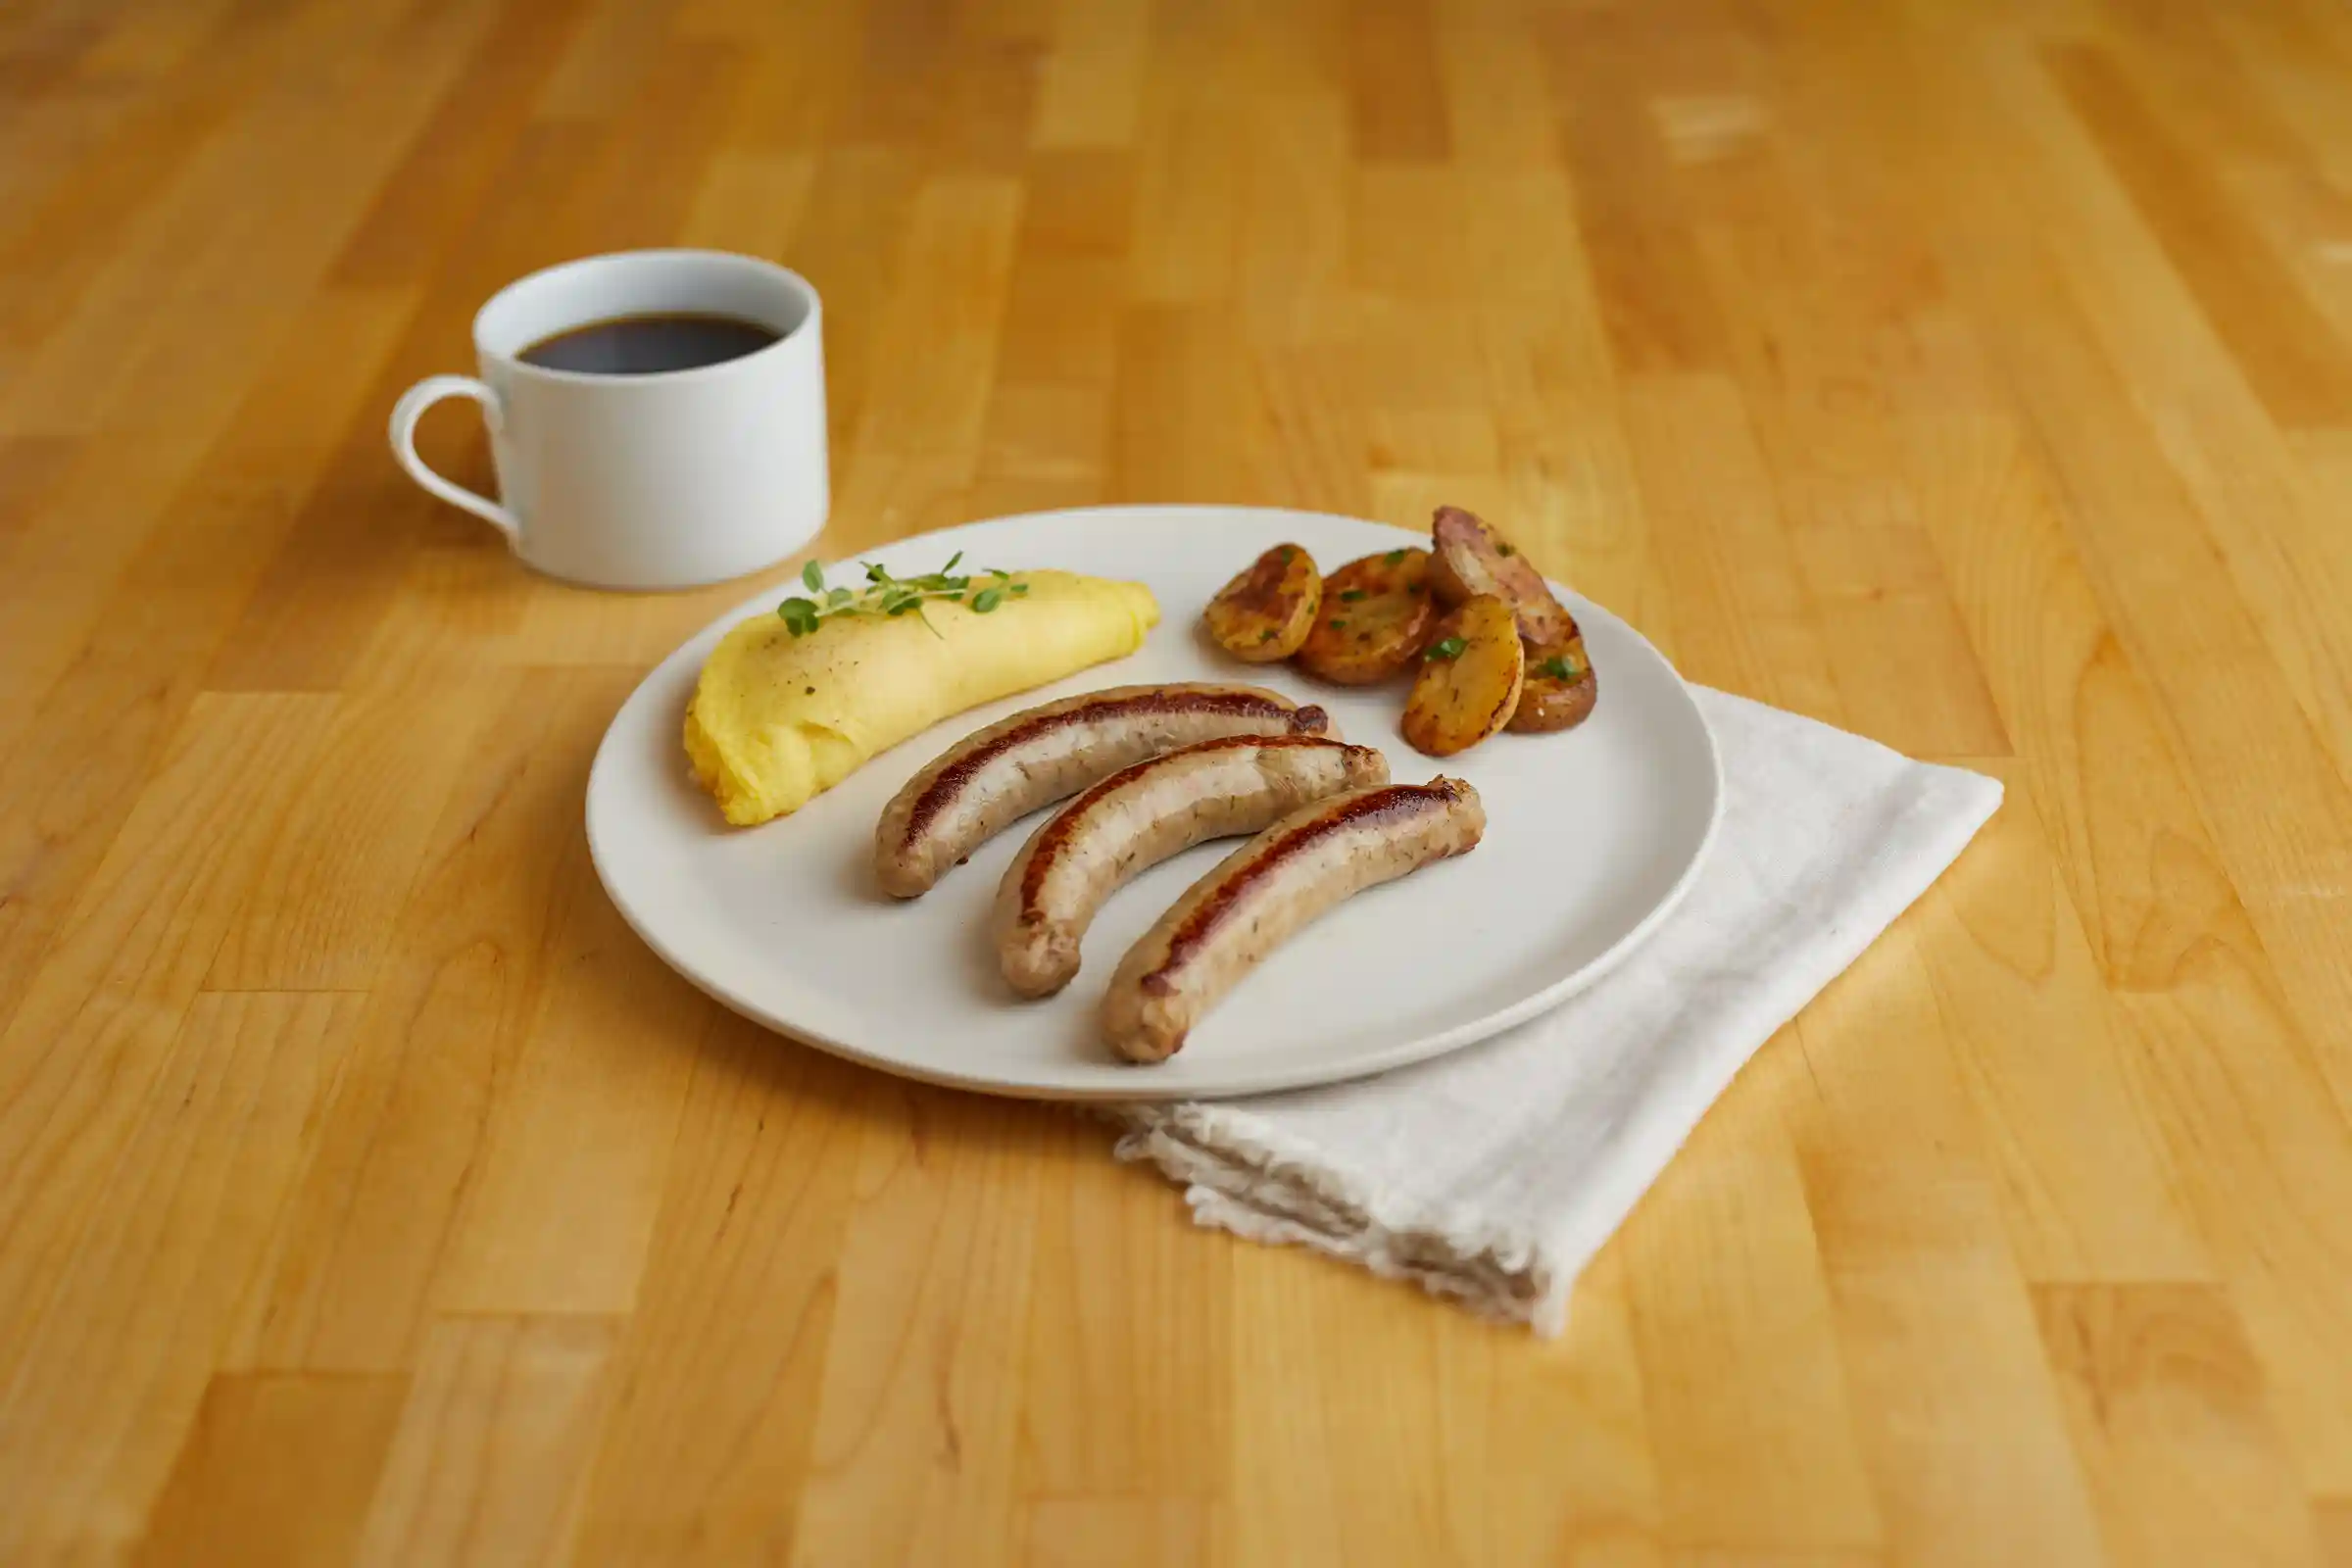 Aidells® Fully Cooked Smoked Chicken and Apple Chicken Sausage Breakfast Linkshttps://images.salsify.com/image/upload/s--5OrWeiBi--/q_25/fnuc5g6rynzoadszdyzi.webp